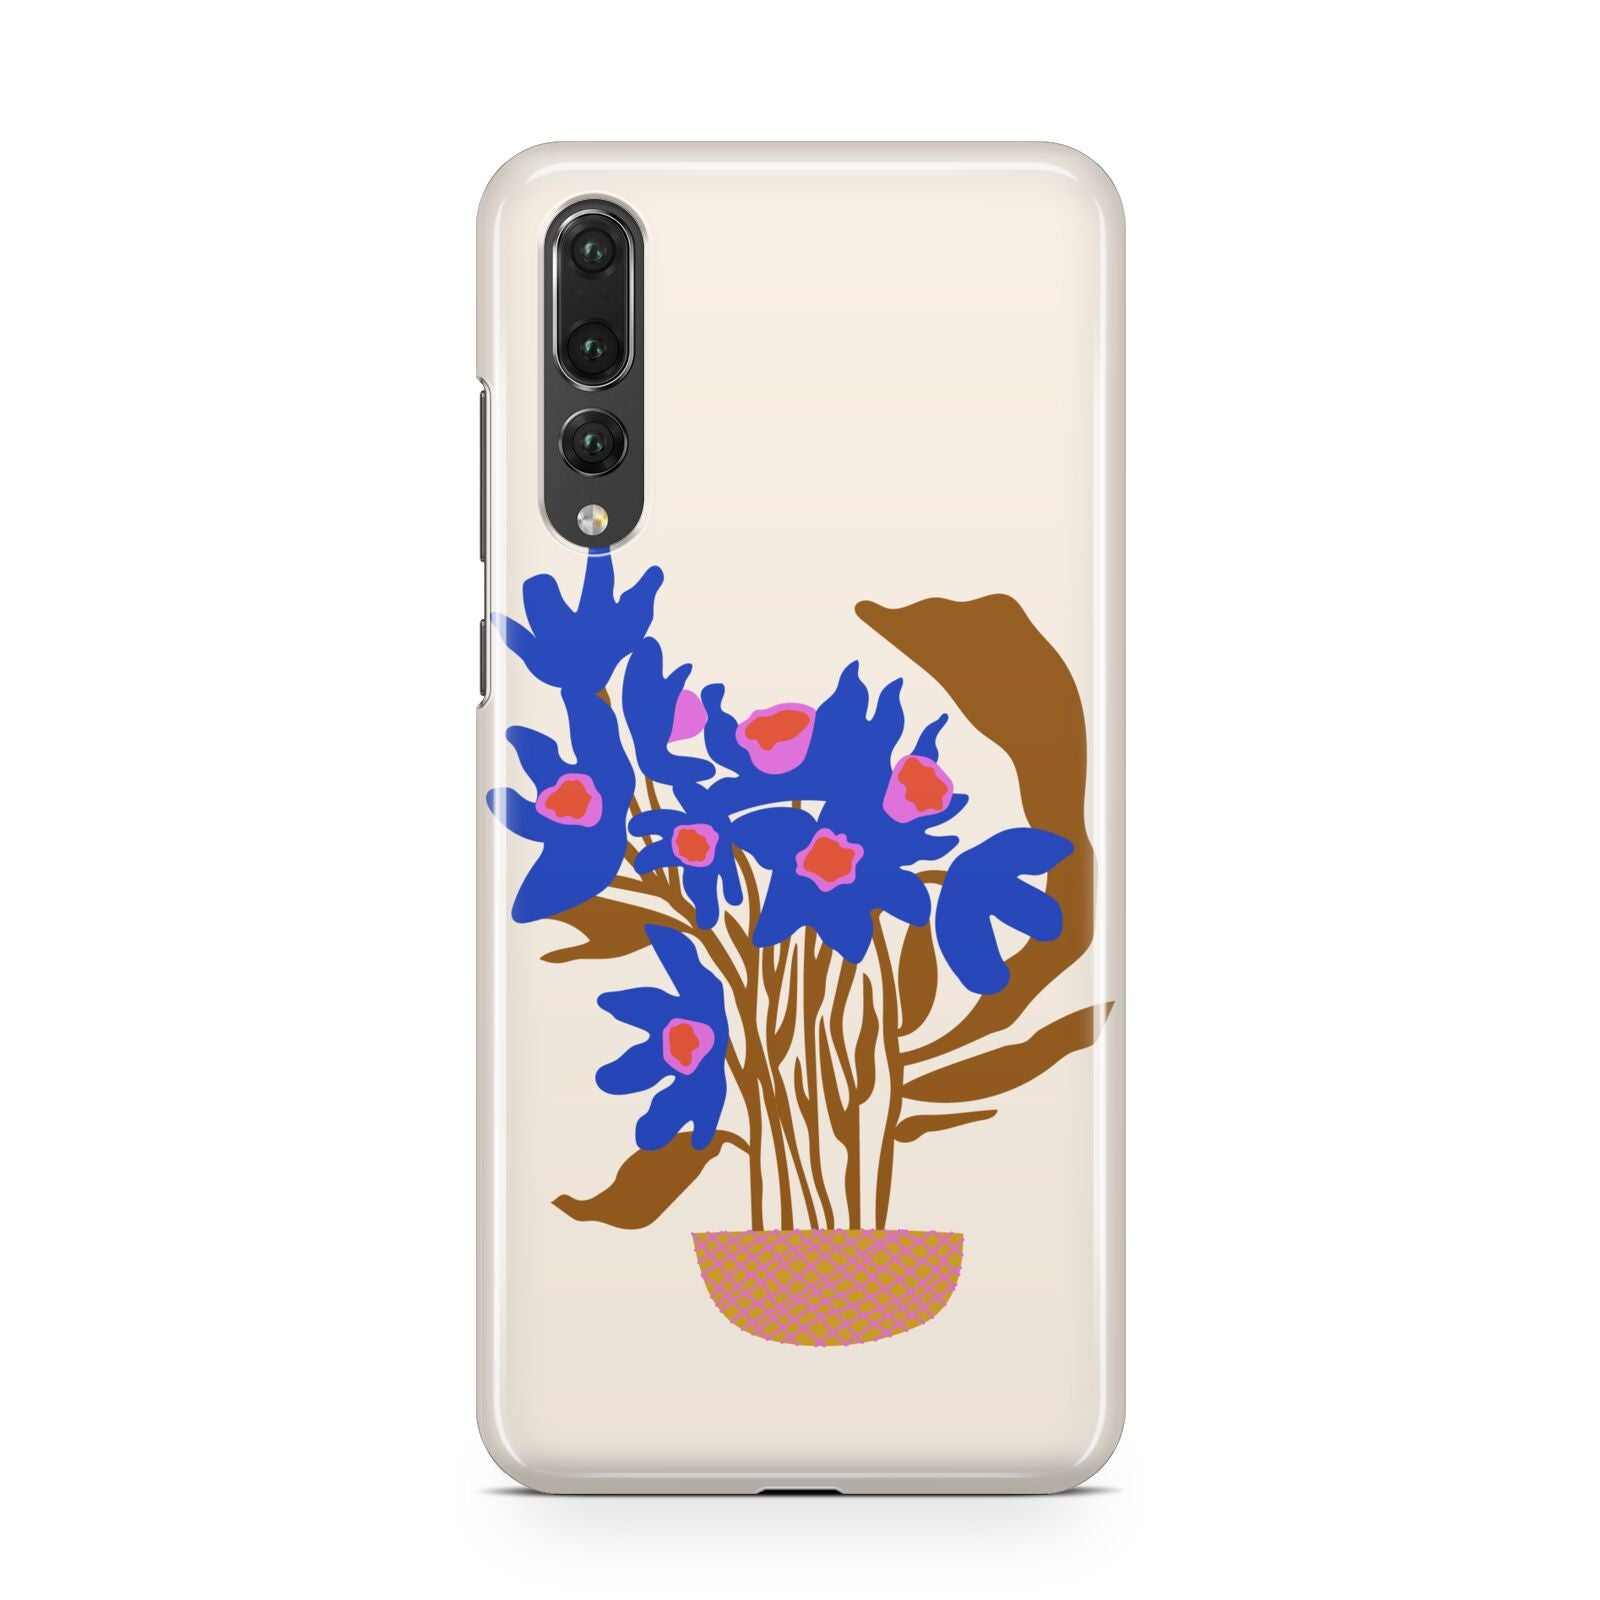 Flowers in a Vase Huawei P20 Pro Phone Case